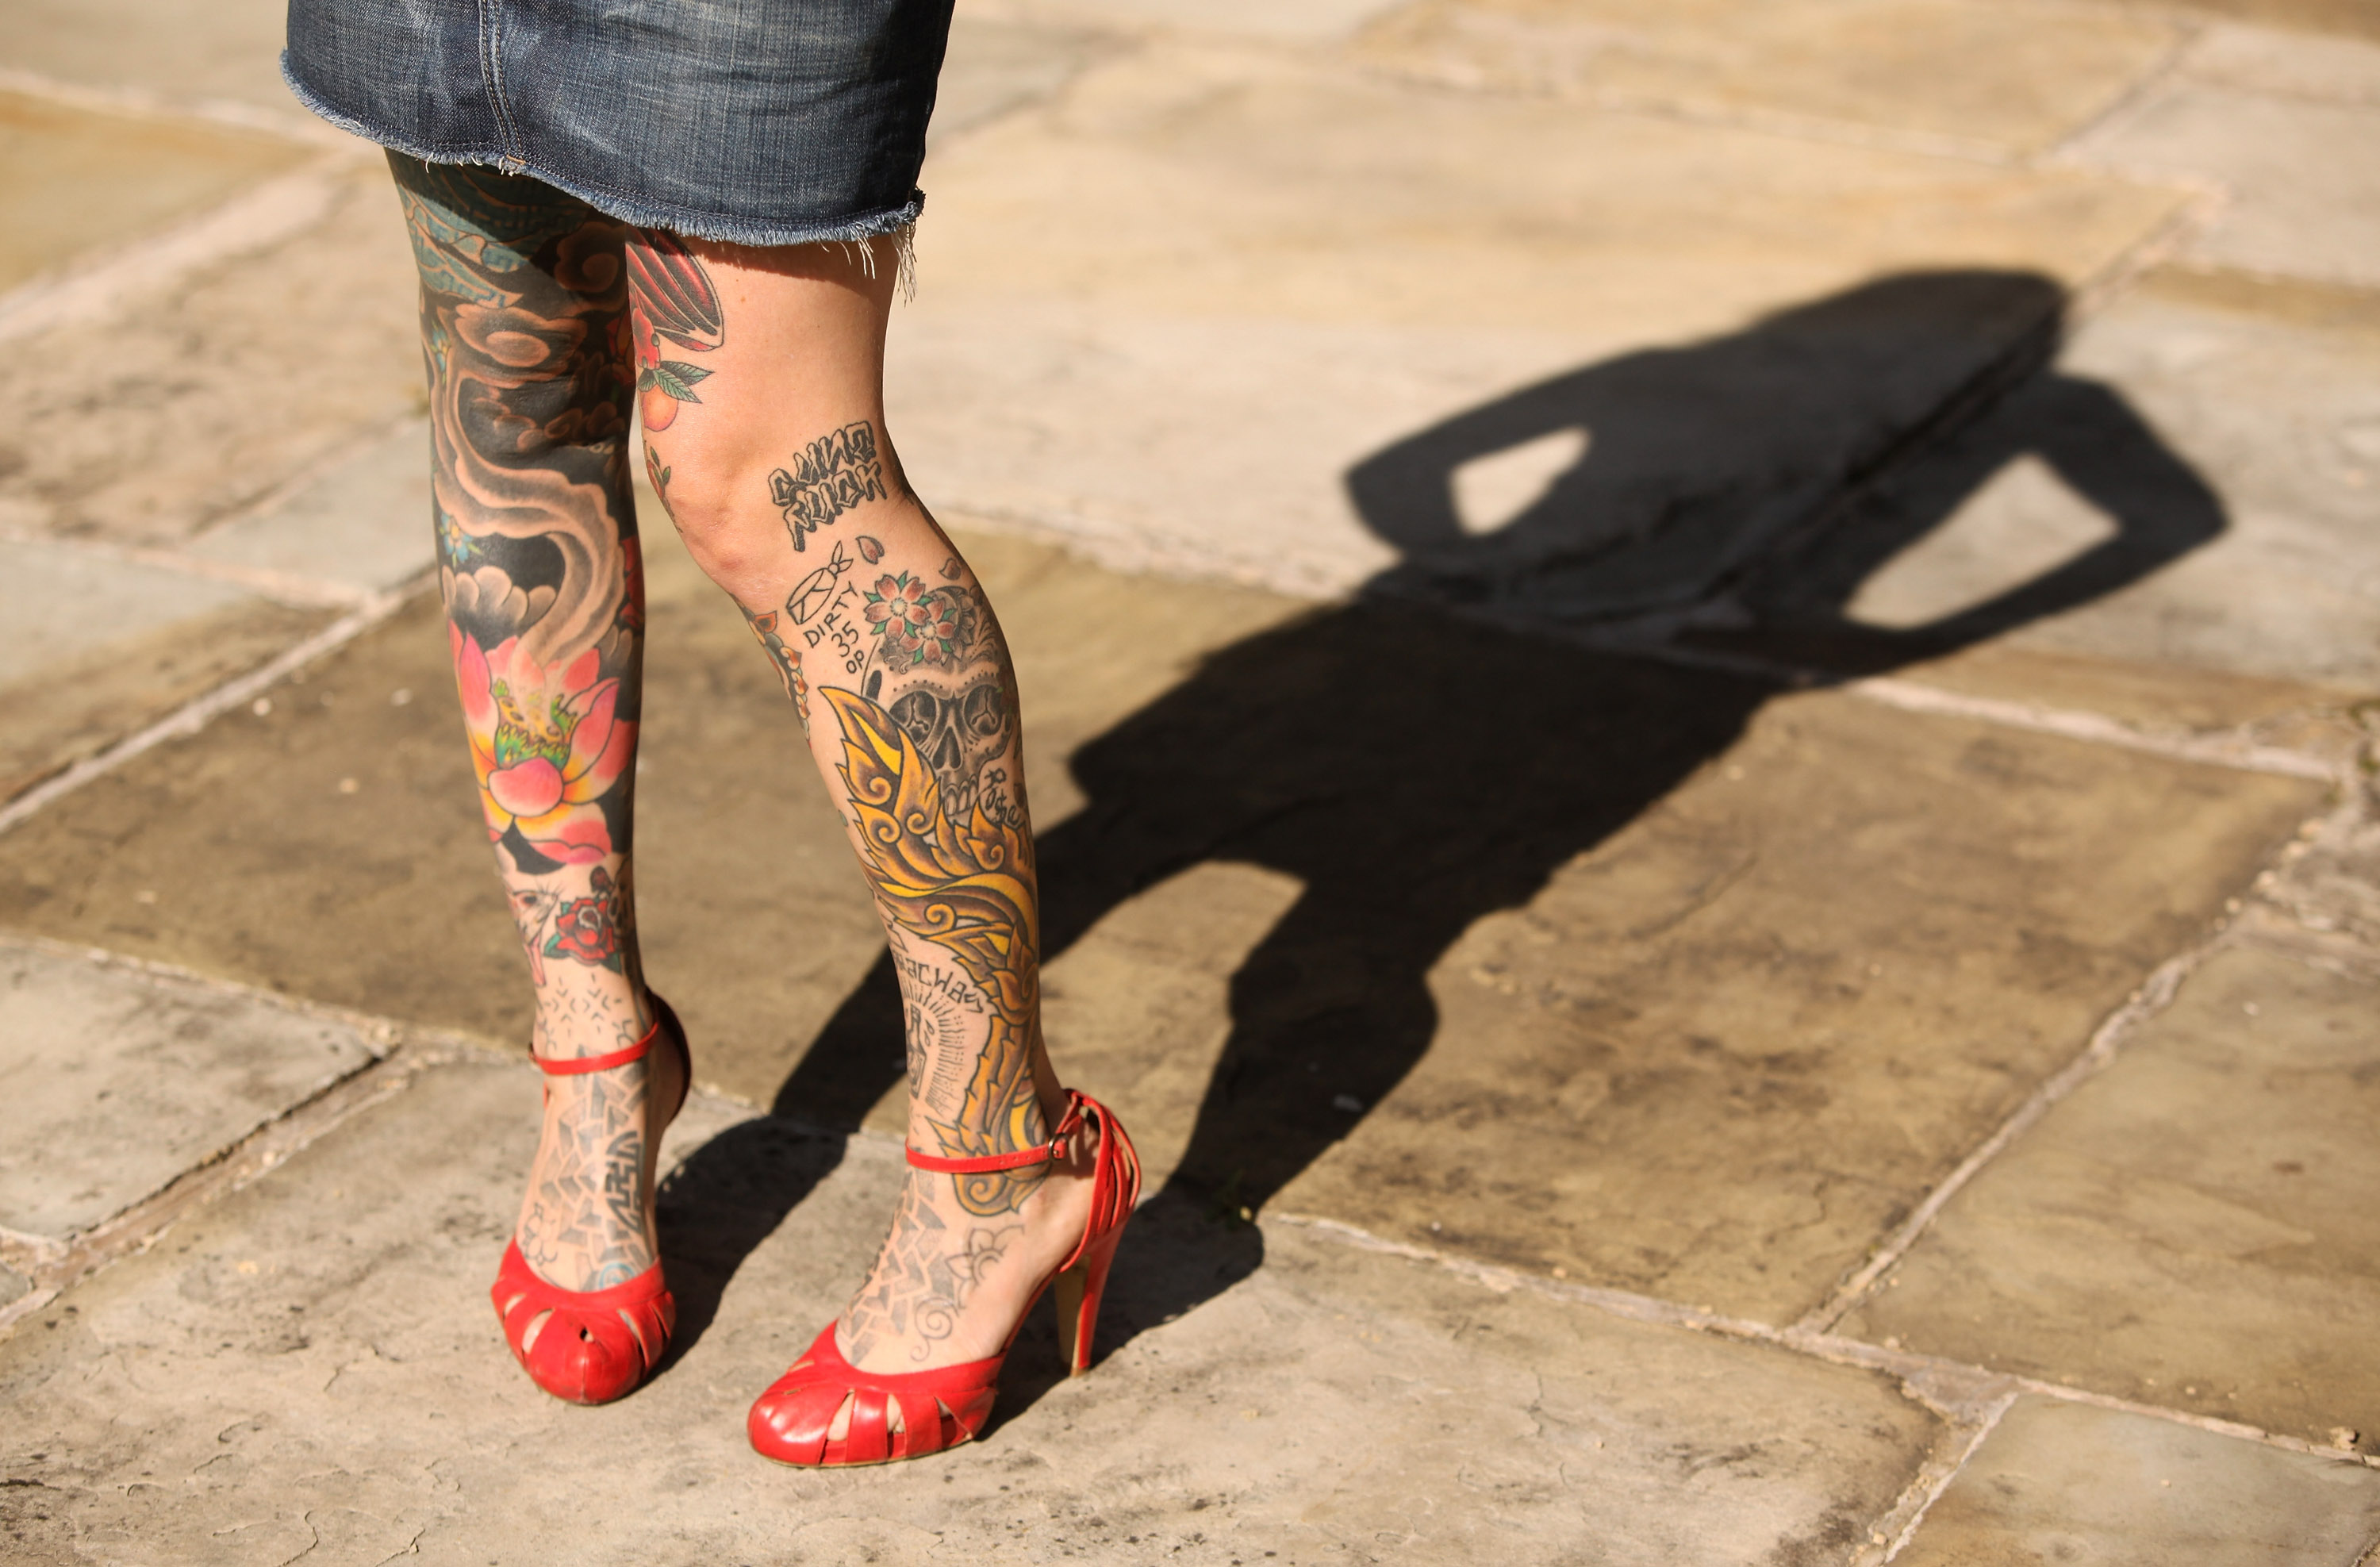 Is it rude to ask about tattoo?